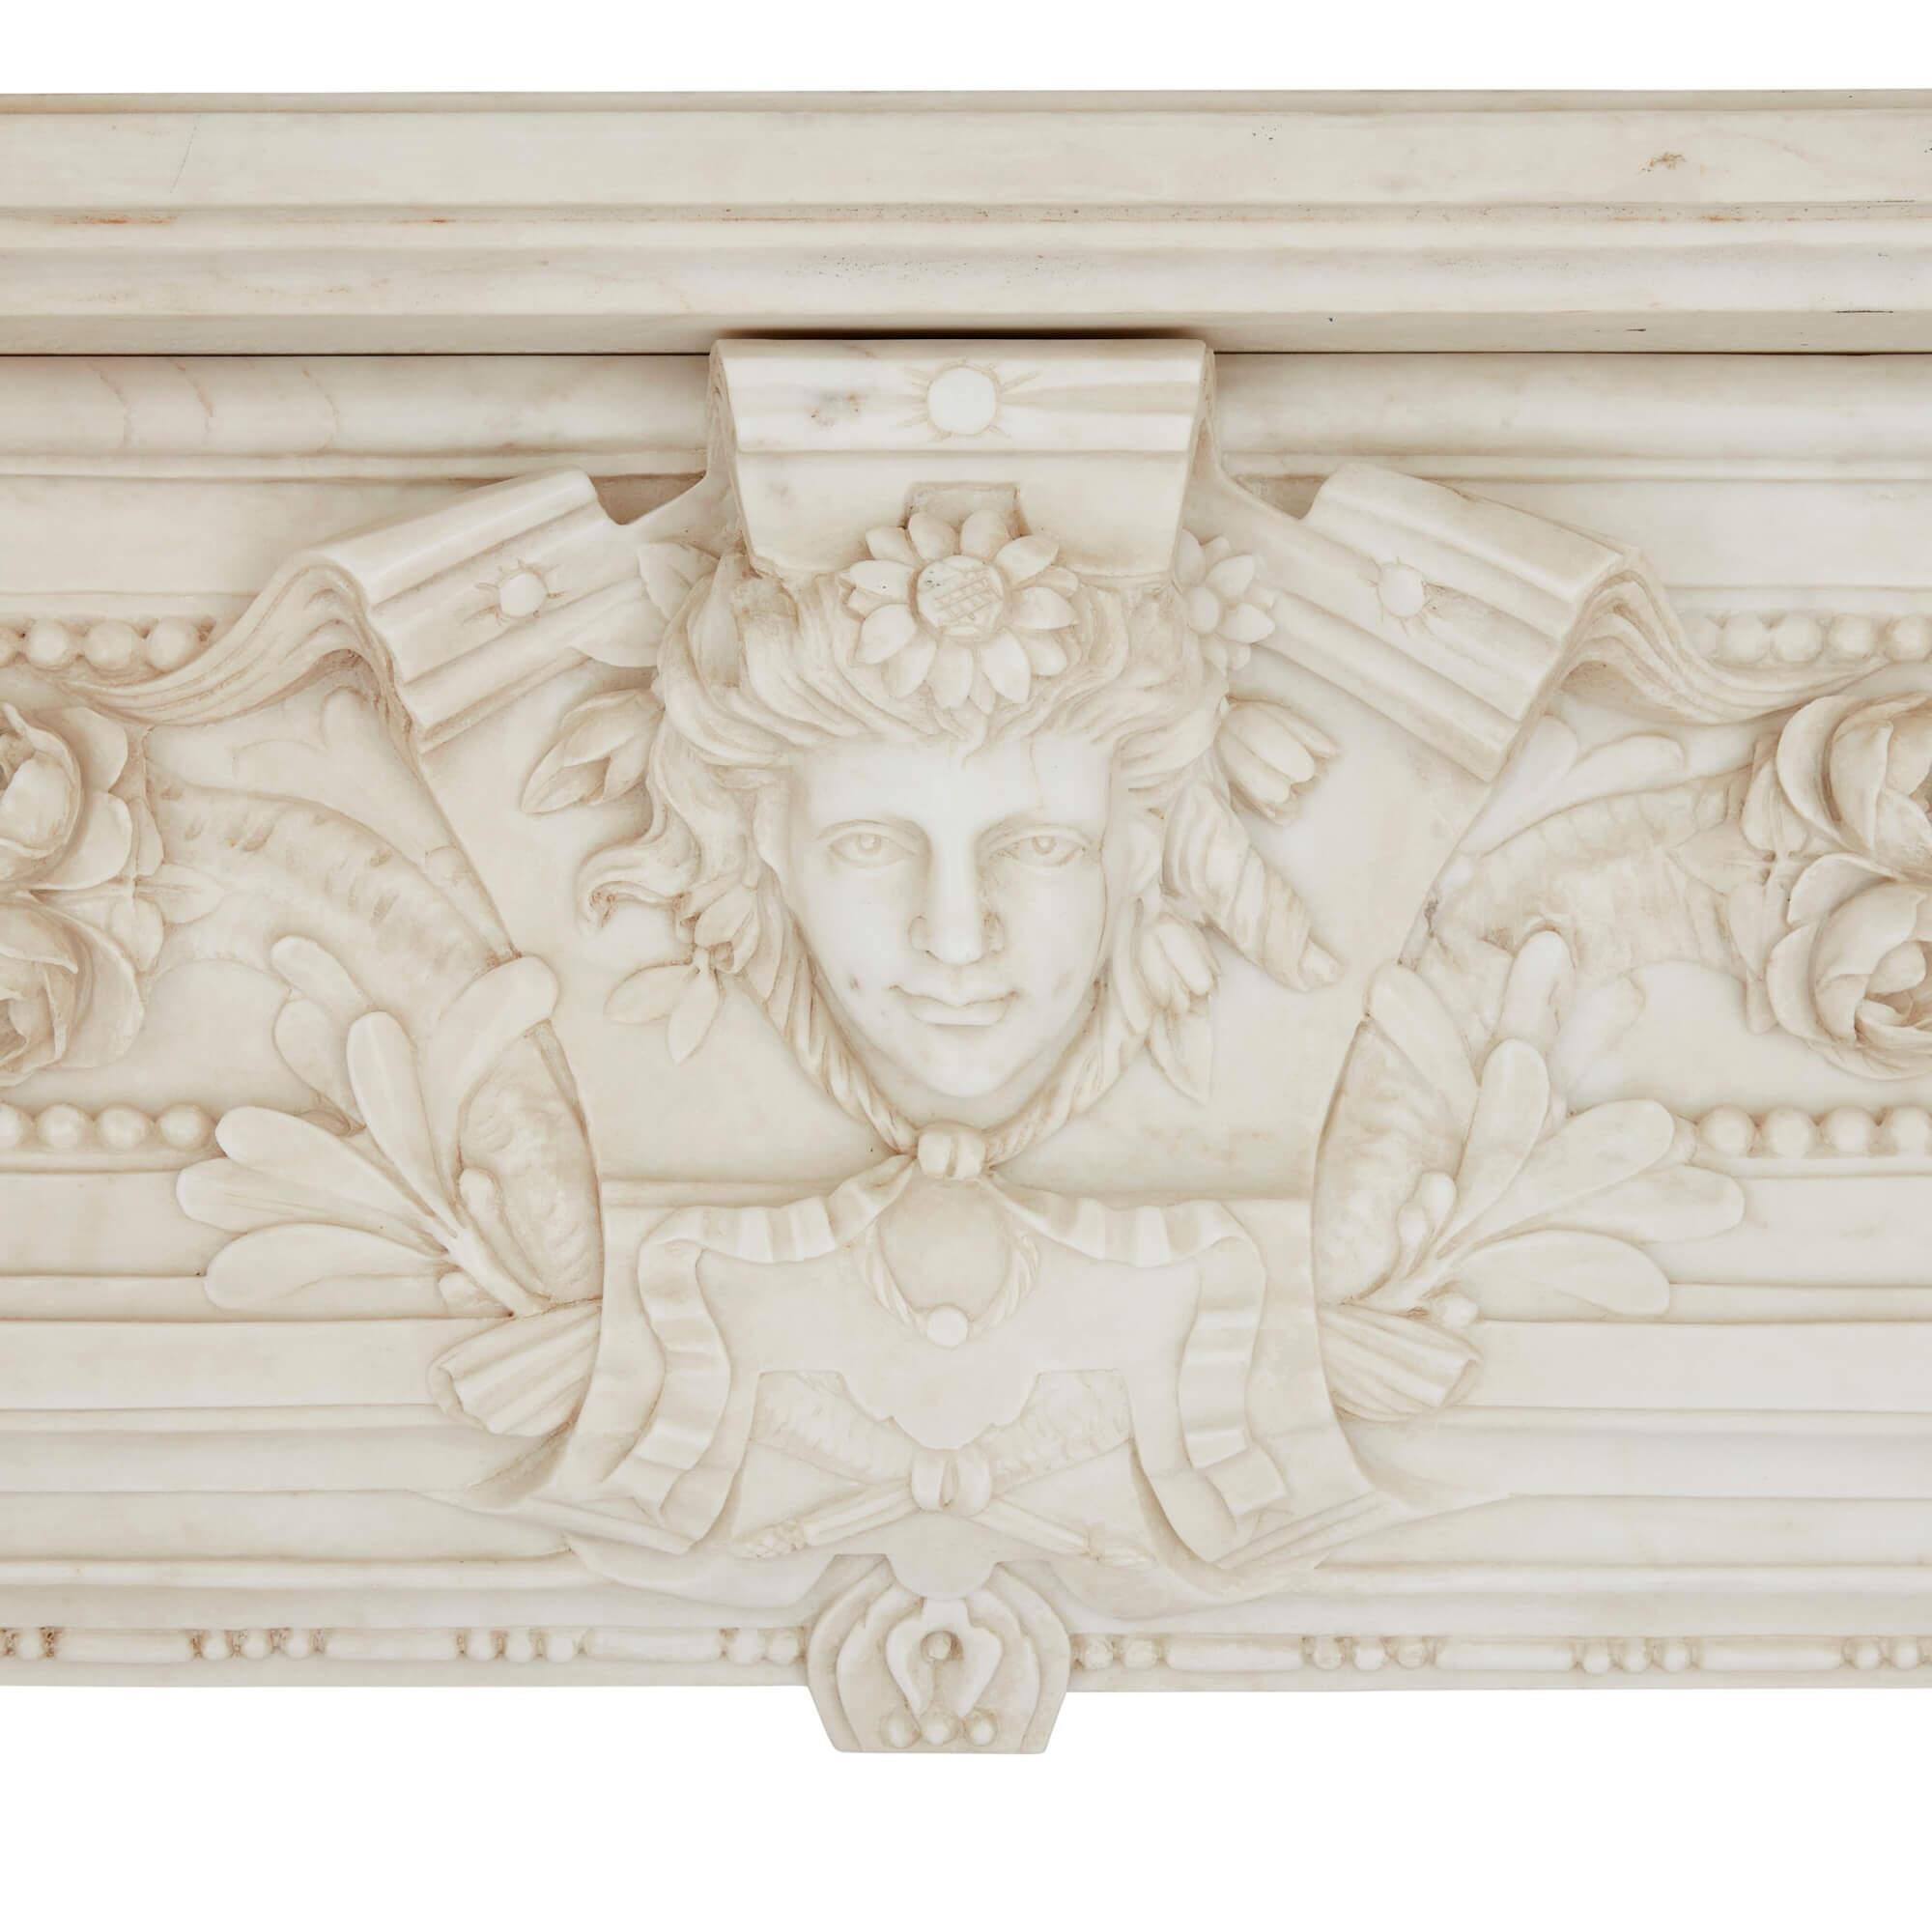 Antique large white marble fireplace, French 19th century
French, 19th Century
Height 140cm, width 185cm, depth 51cm

This incredible piece of marble furniture is superbly carved in the Louis XVI style. The apron is centred with a high-relief mask: